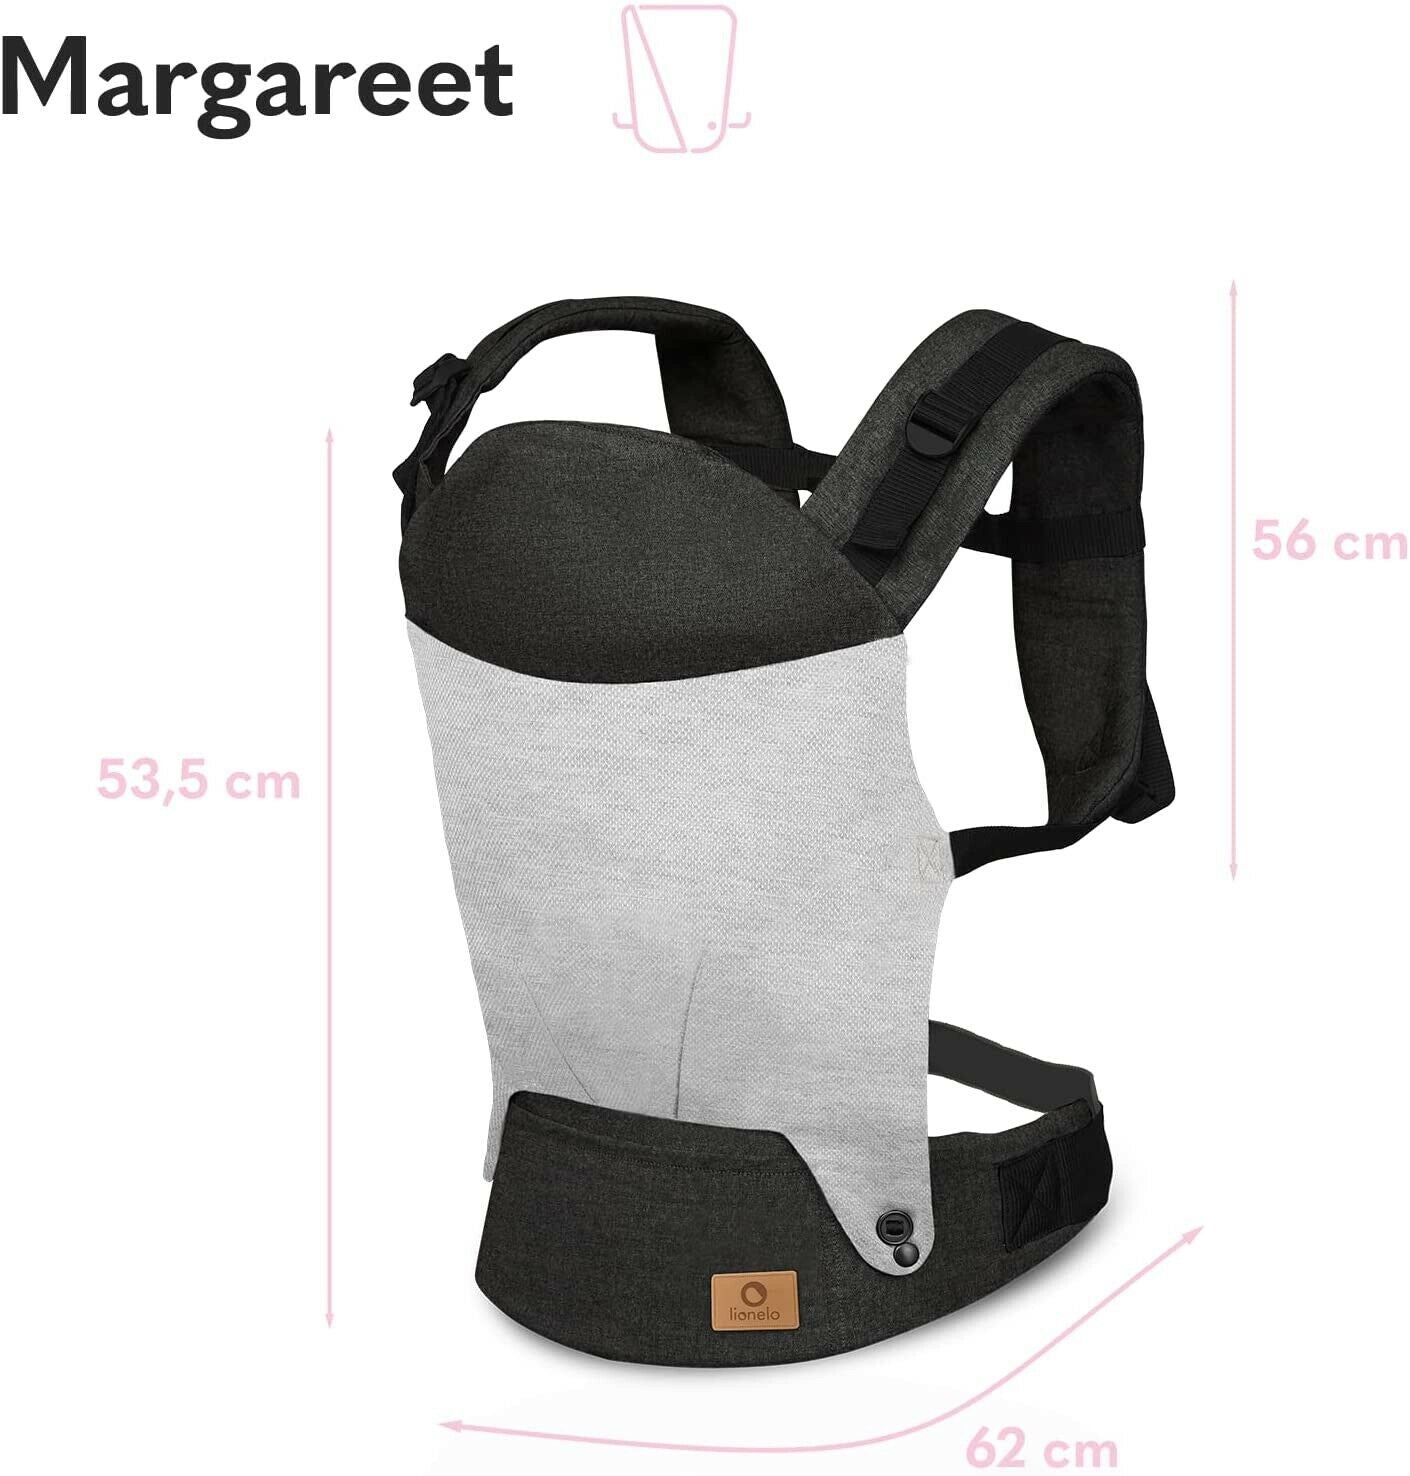 Lionelo Baby Carrier Margareet 3 Carrying Positions Belt Urban Gray